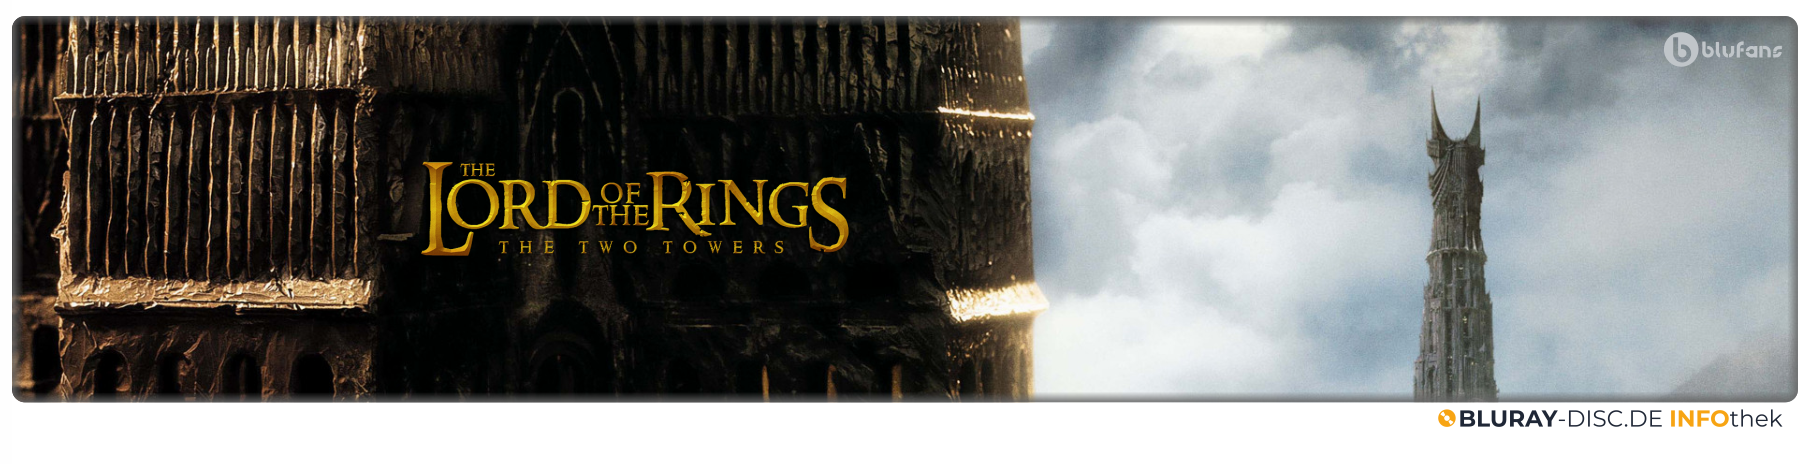 The_Lord_of_the_Rings_-_The_Two_Towers.png